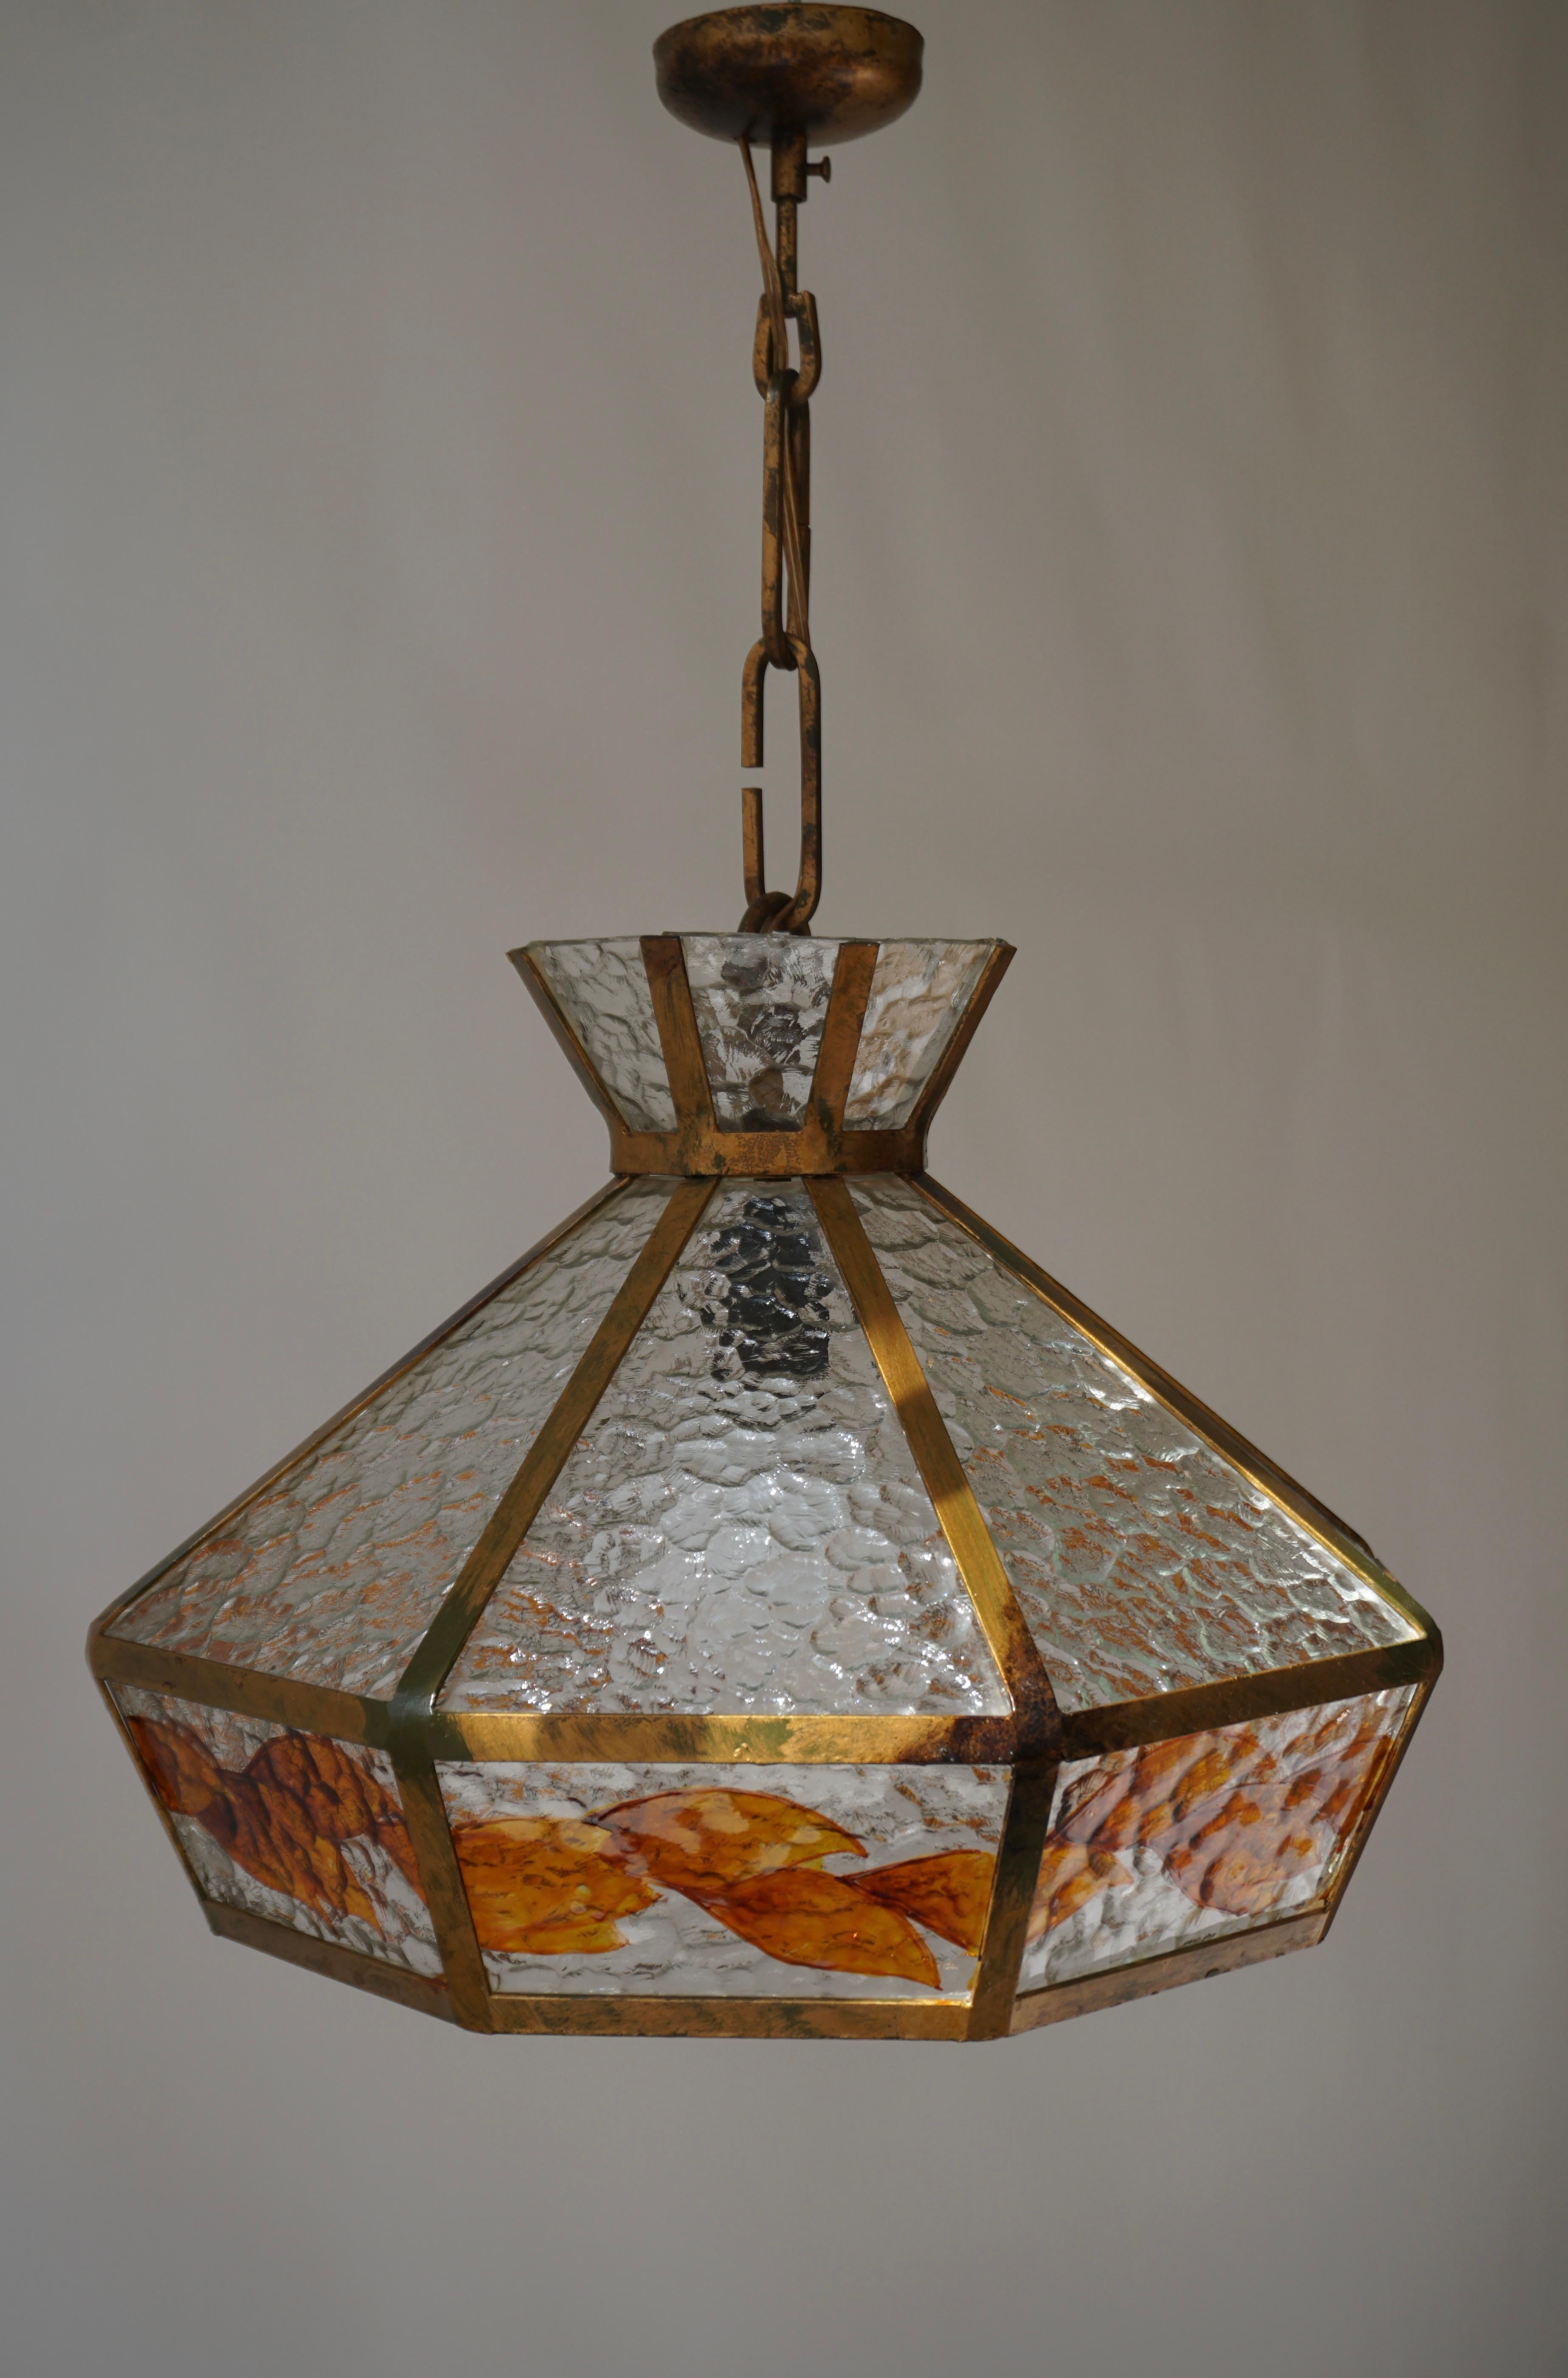 20th Century Brutalist Hand Painted Stained Glass Pendant Light Fixture For Sale